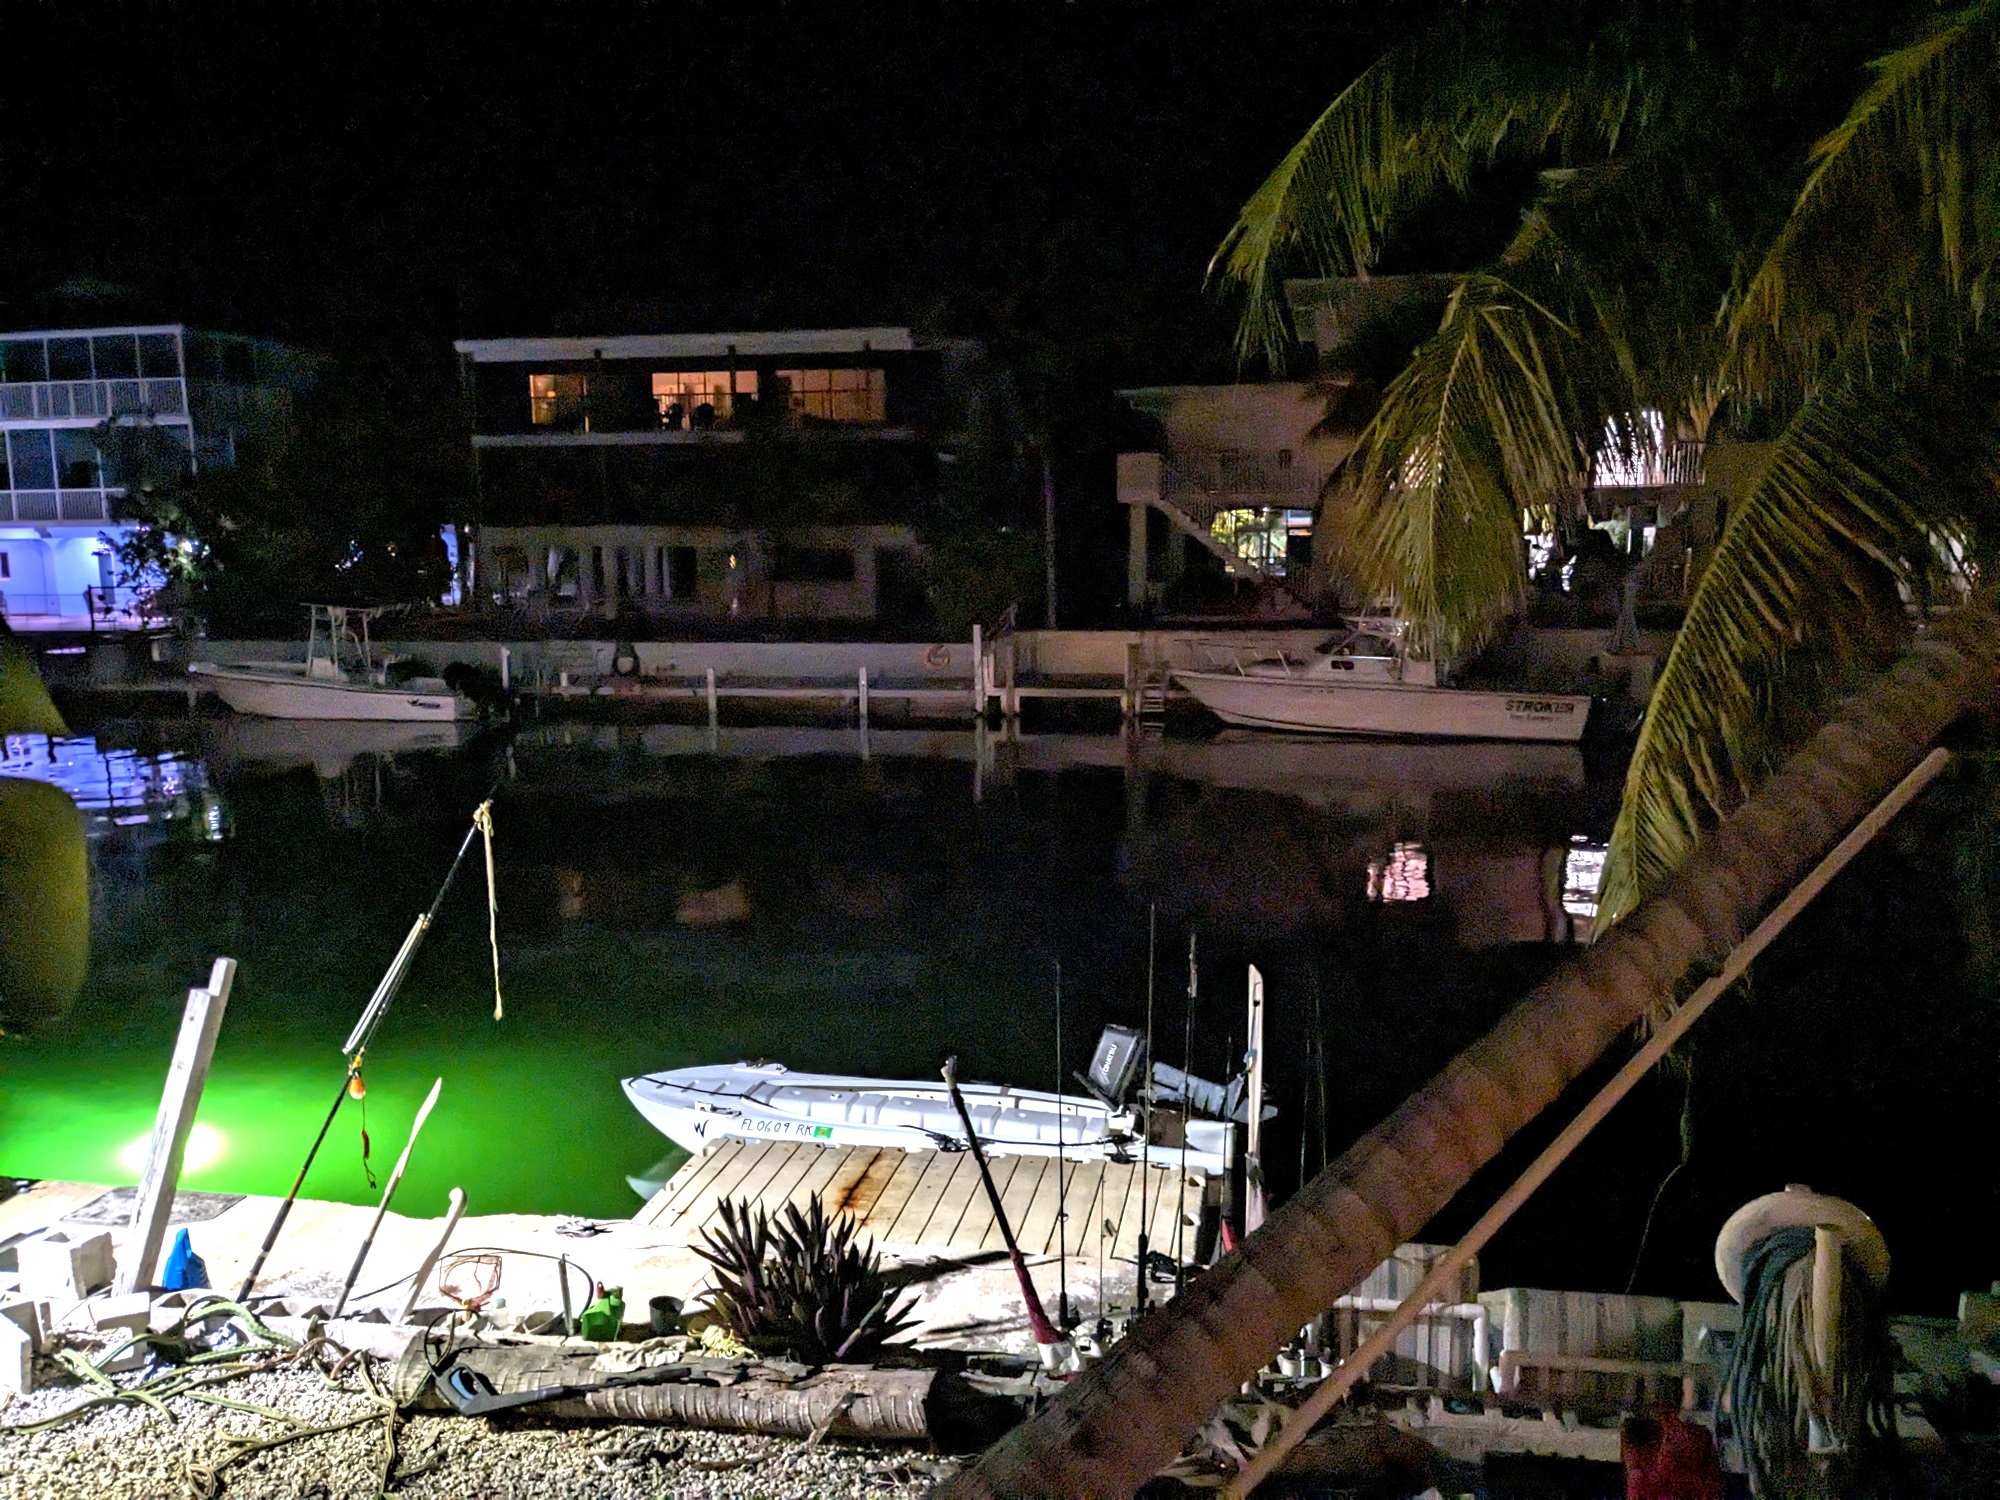 Garden Cove at Night